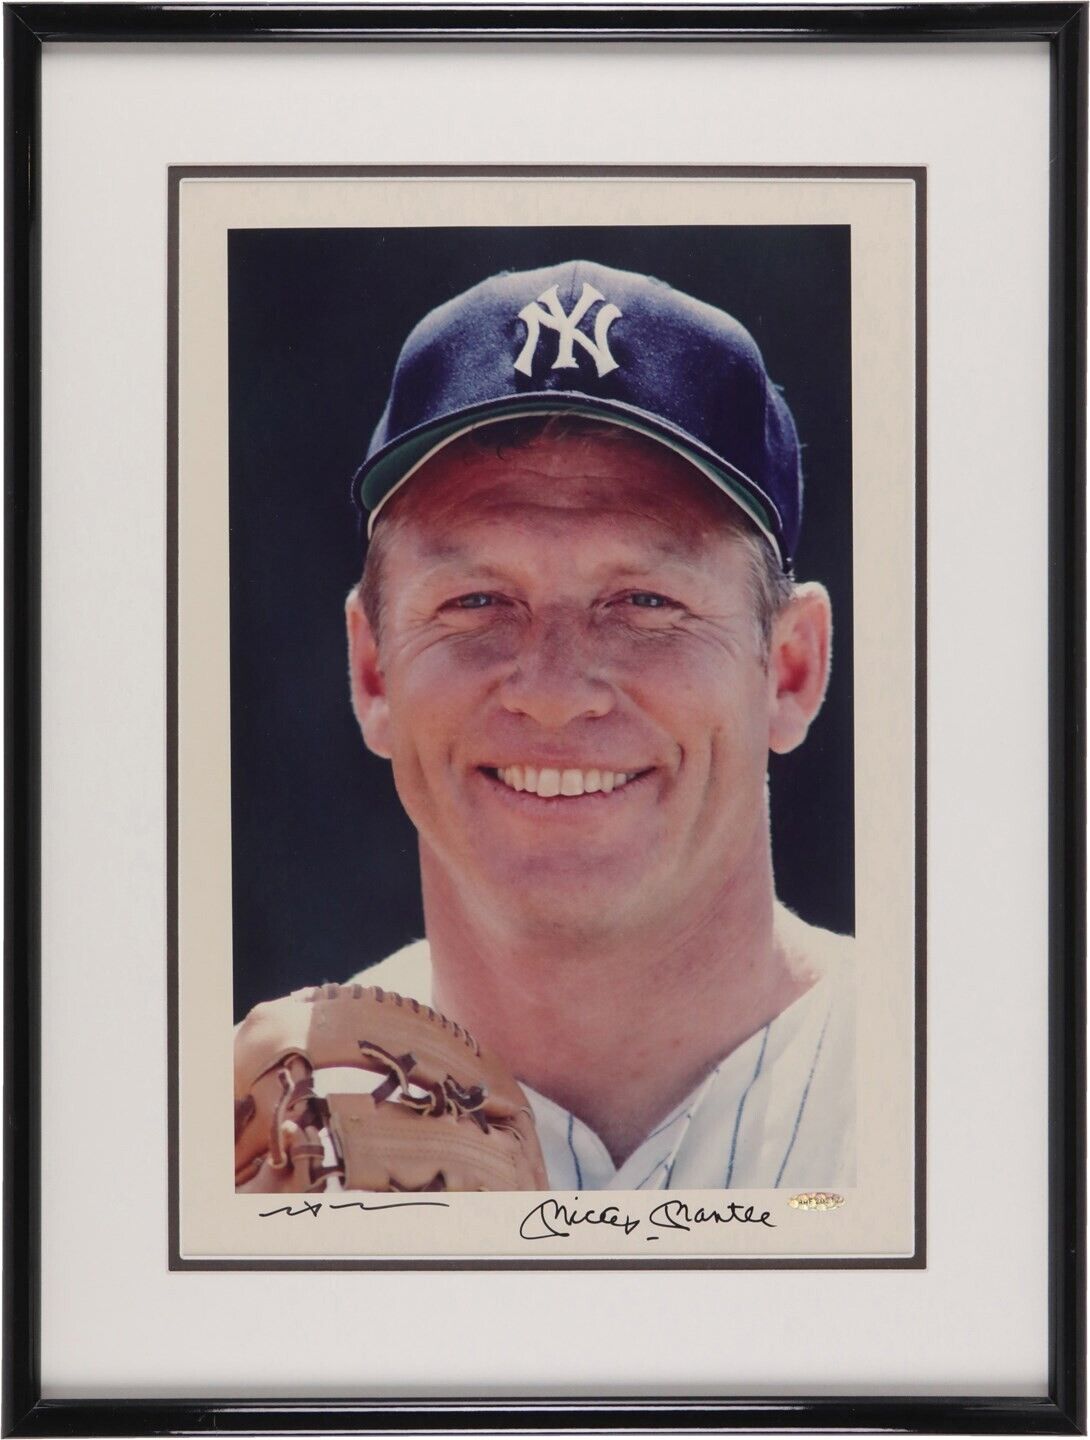 Mickey Mantle Signed 16x20 Neil Leifer Photo. Upper Deck UDA Limited Edition